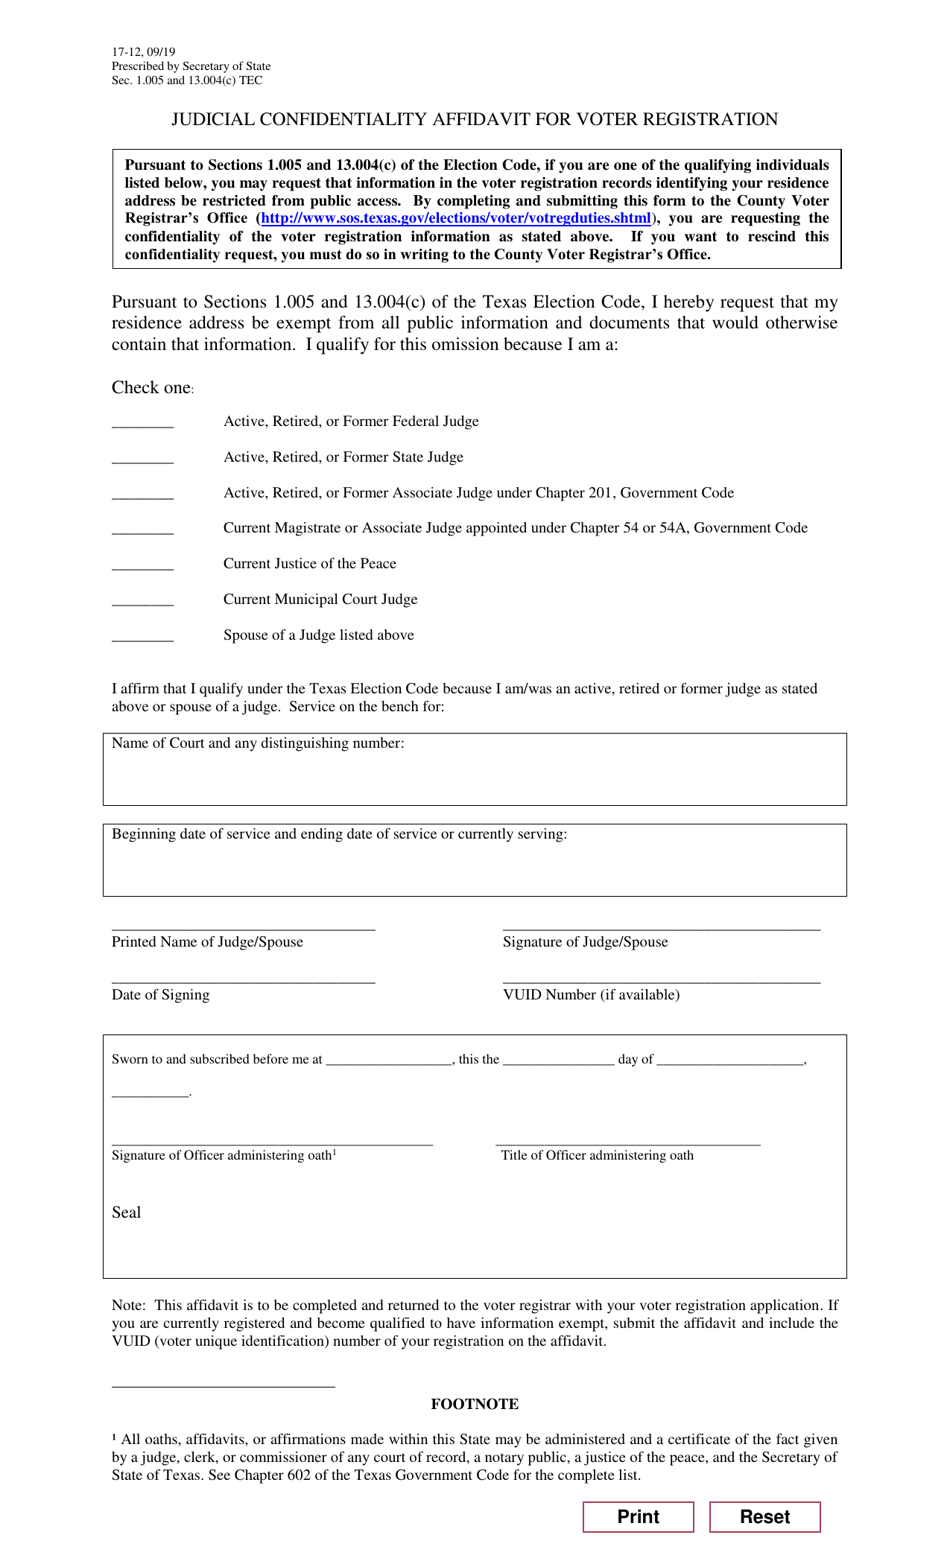 Form 17-12 (BW9-2) Judicial Confidentiality Affidavit for Voter Registration - Texas (English / Spanish), Page 1